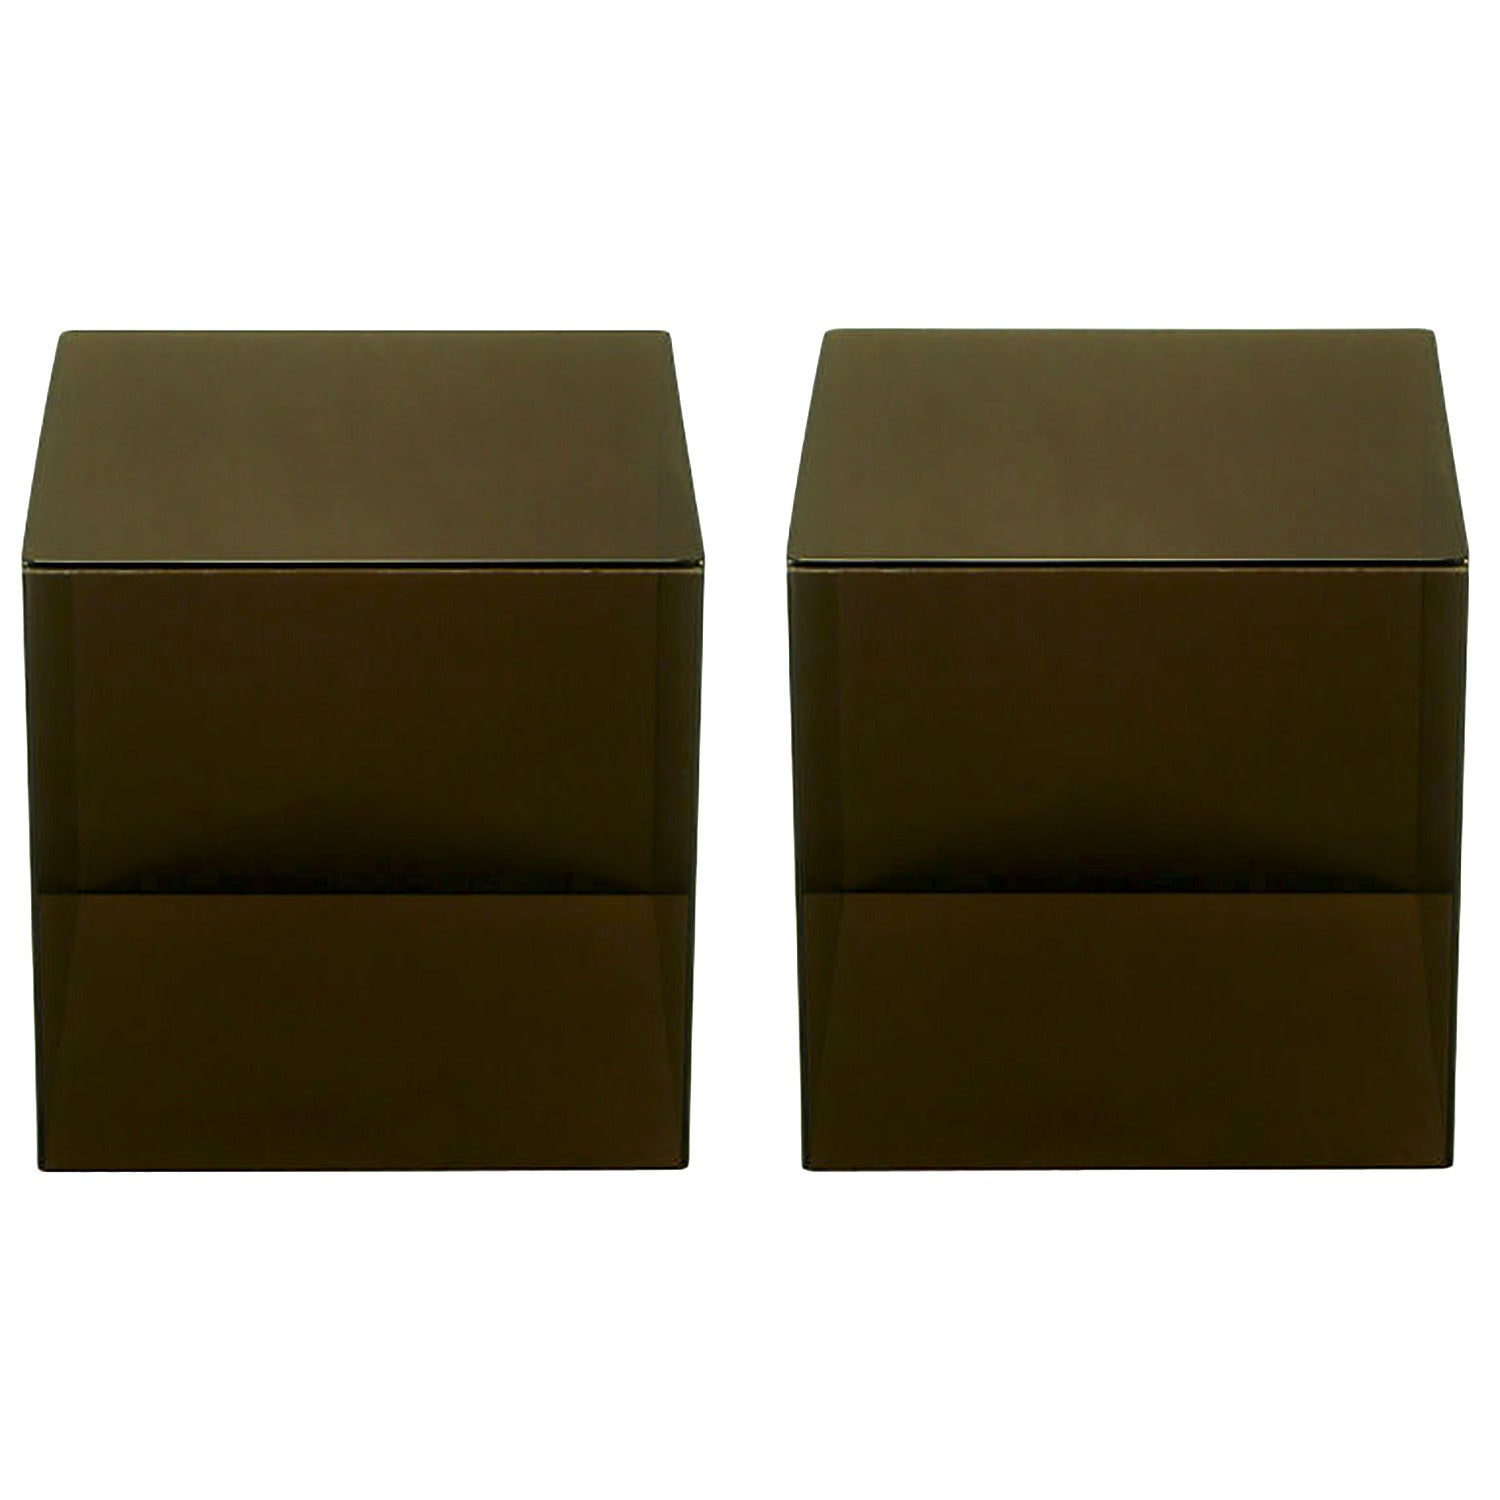 Pair of Smoked Lucite Cube End Tables